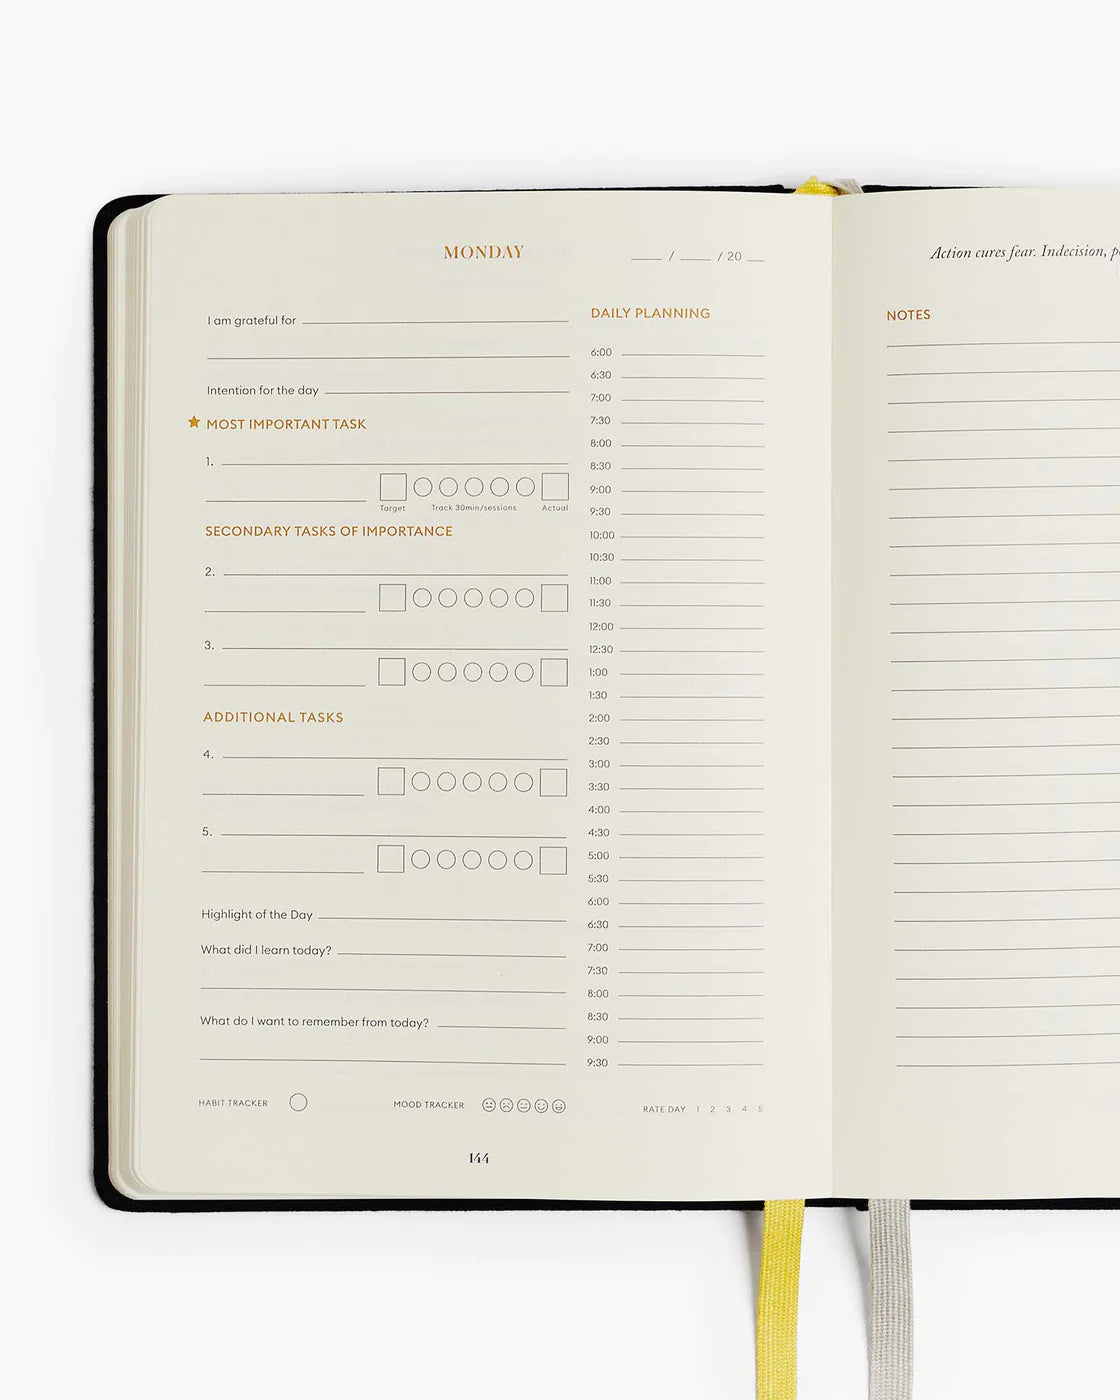 Productivity planner in black